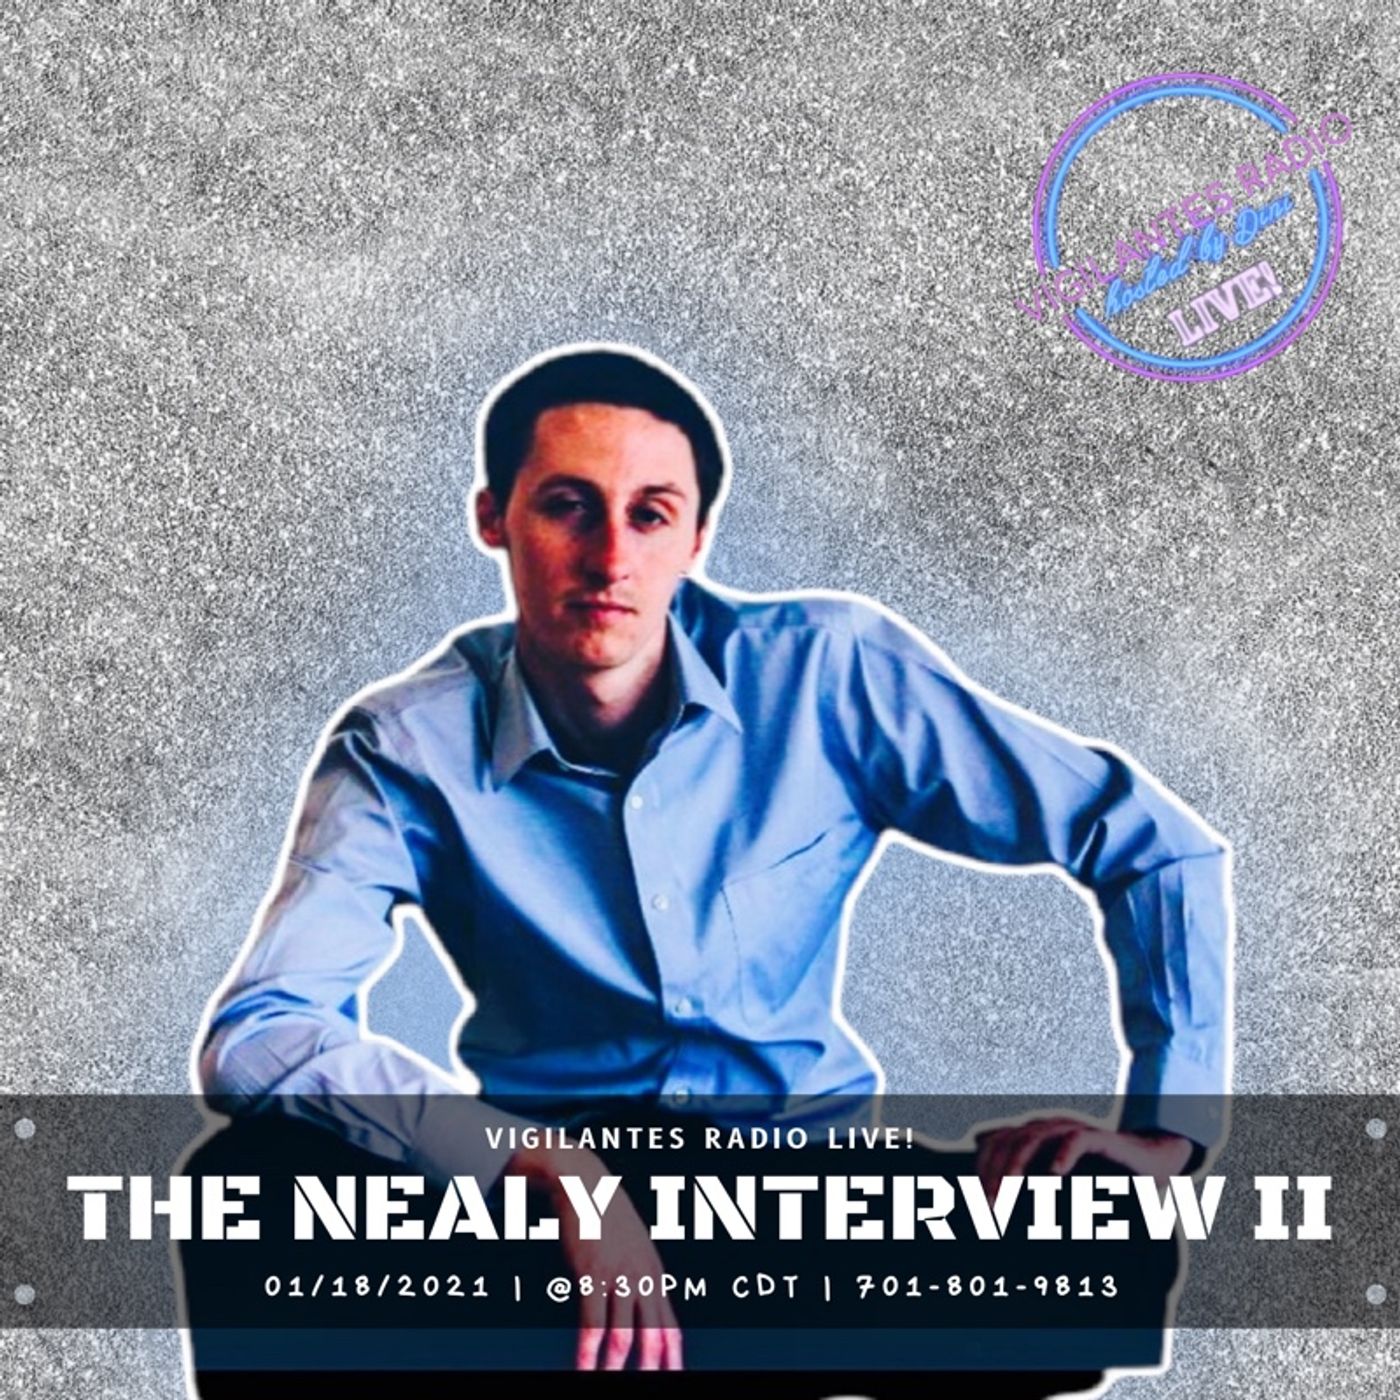 The Nealy Interview II. Image